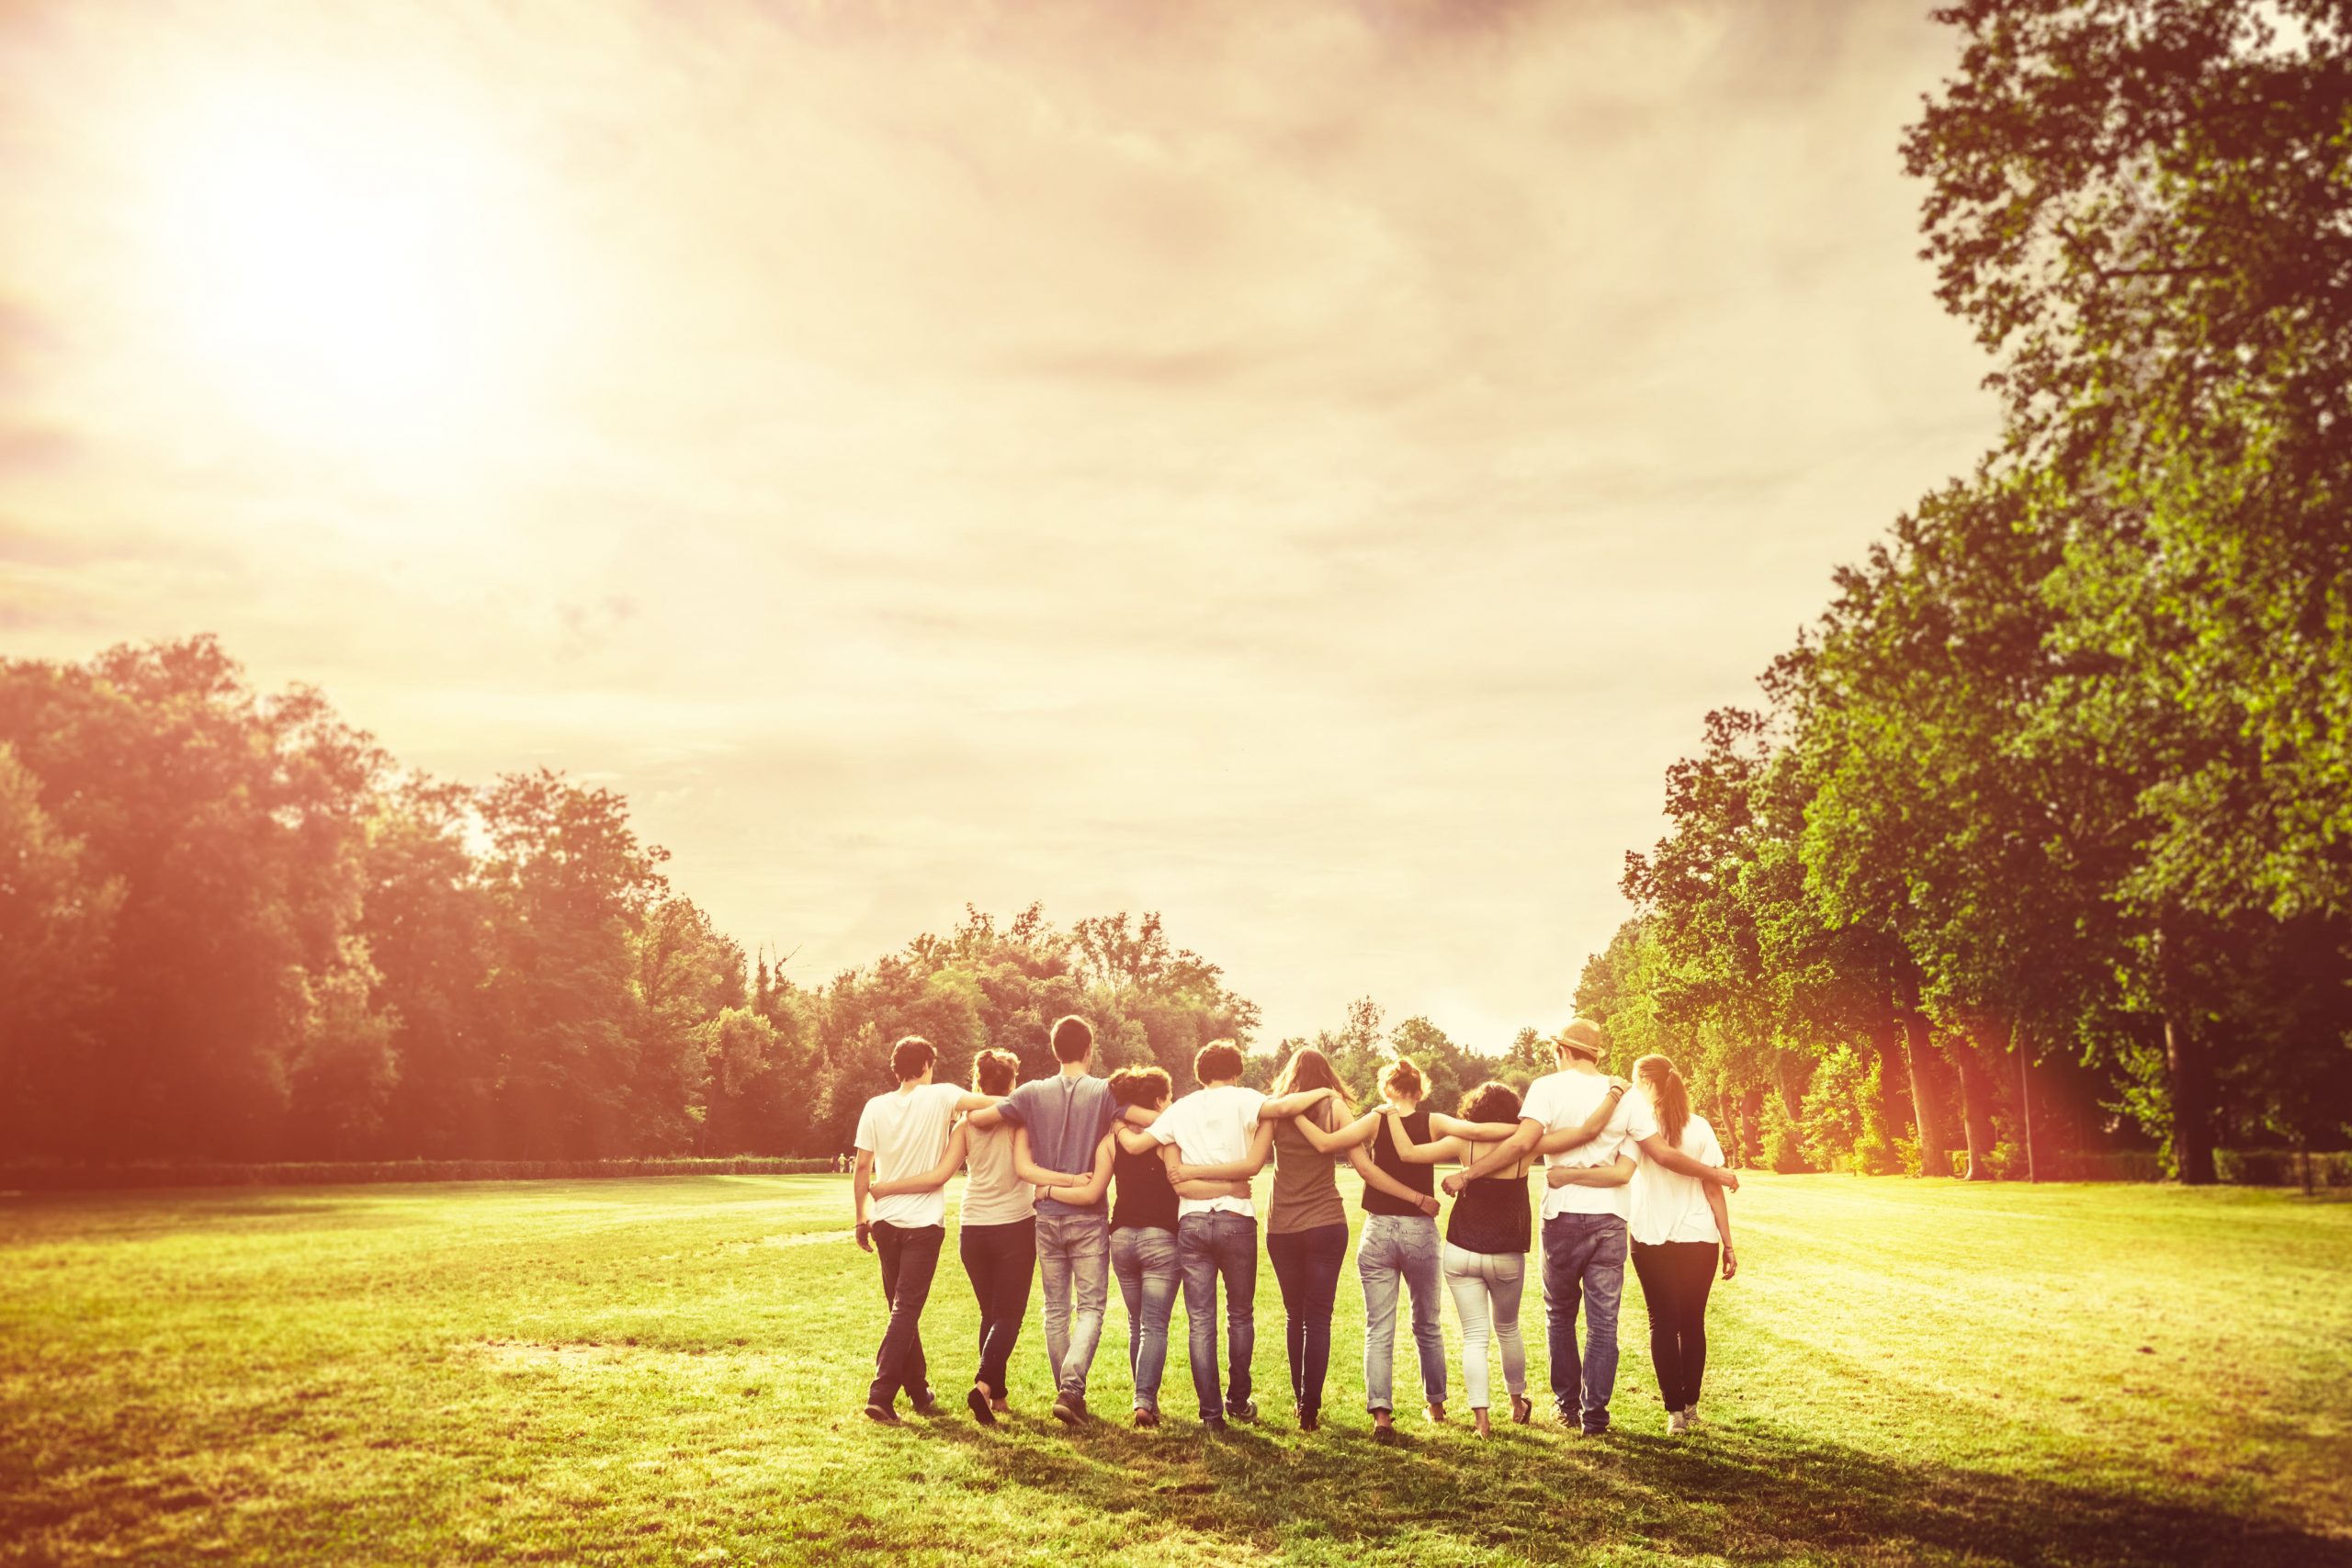 young adults side-by-side holding each others shoulders in a field with trees in the background.